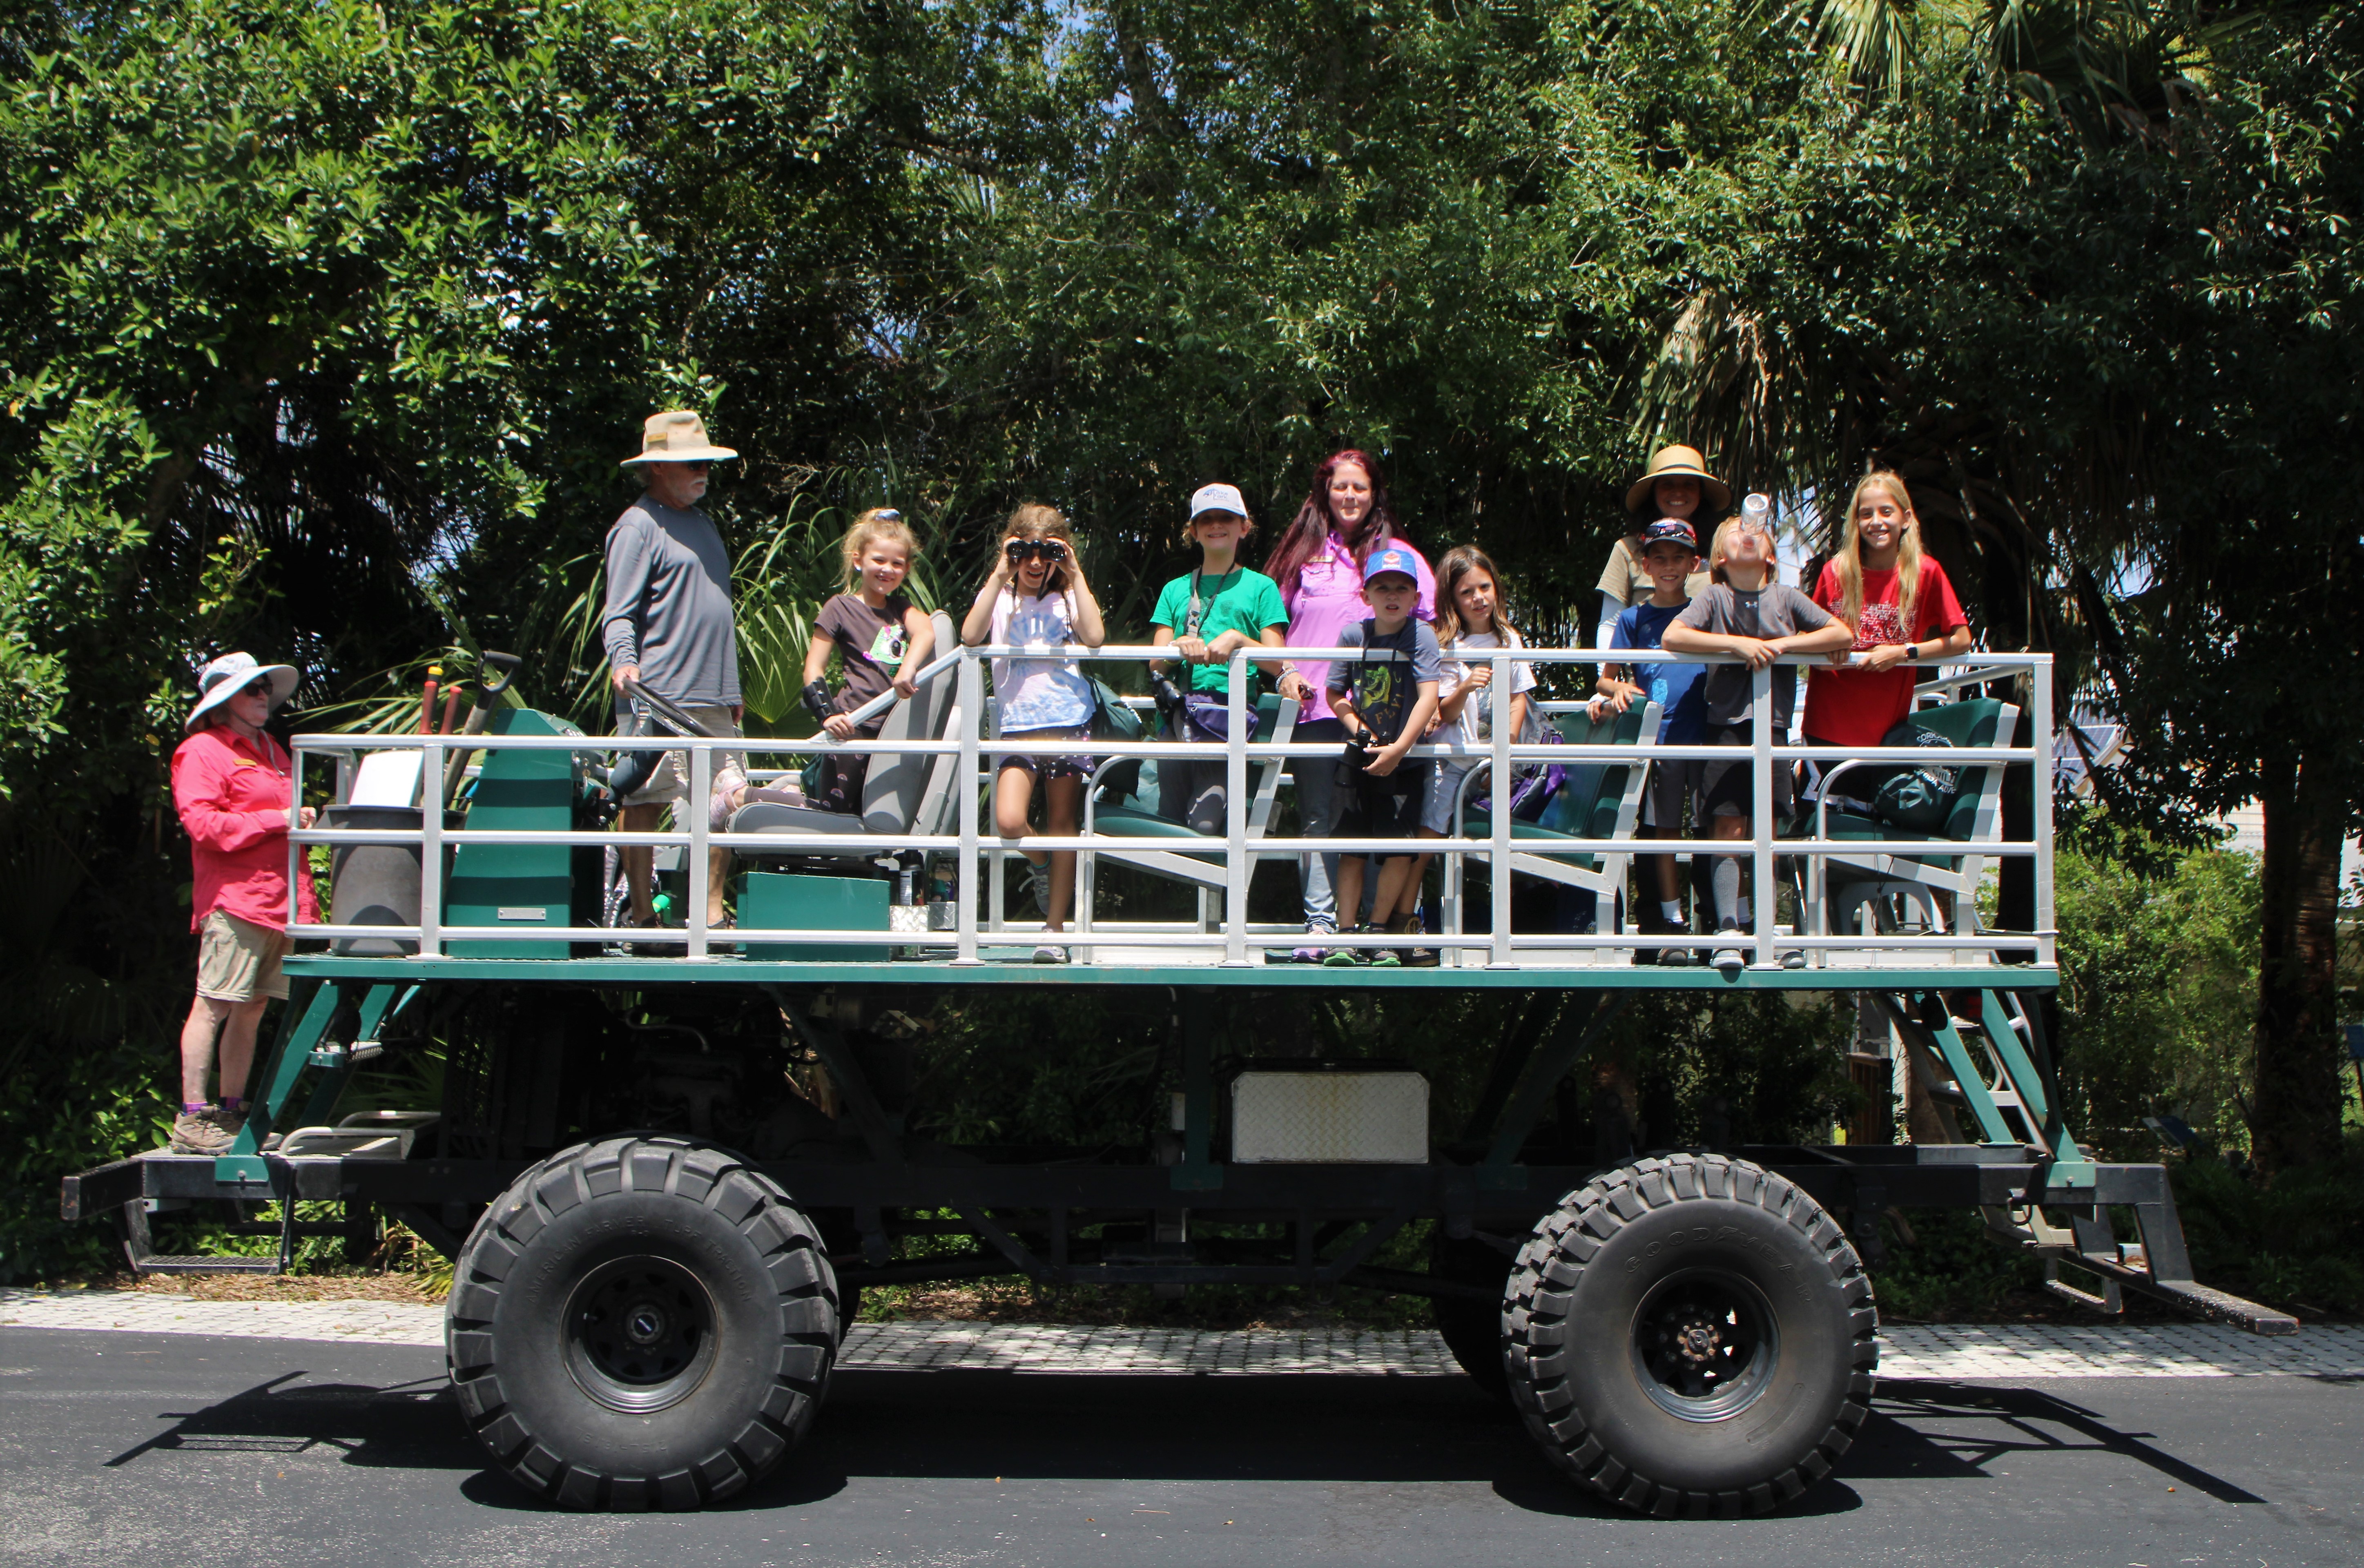 Kids onboard a large vehicle.